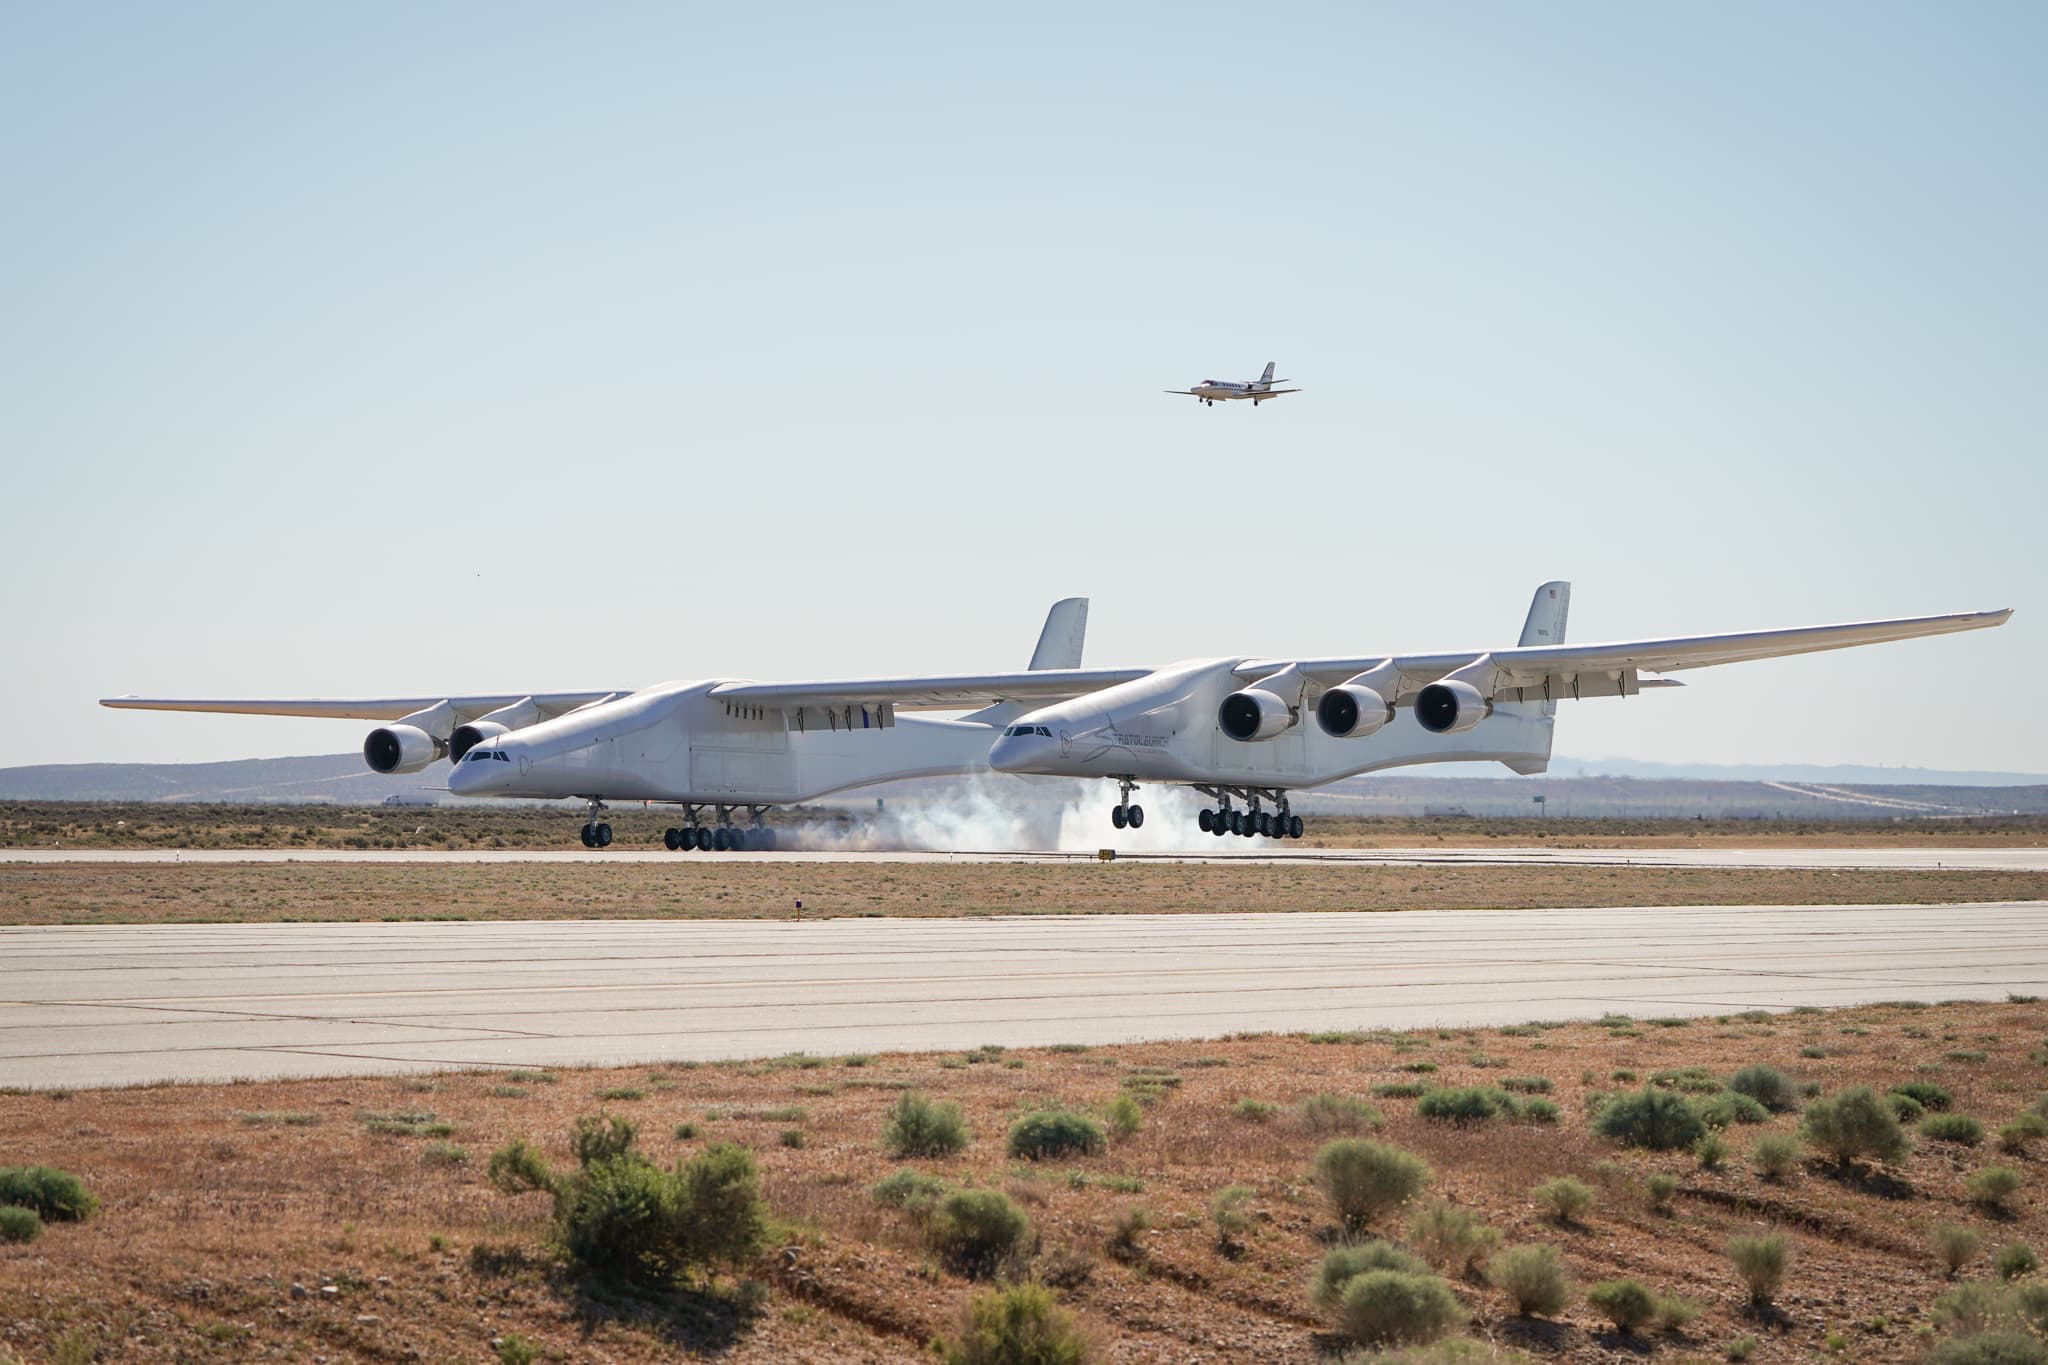 The world's largest airplane is up for sale for $400 million